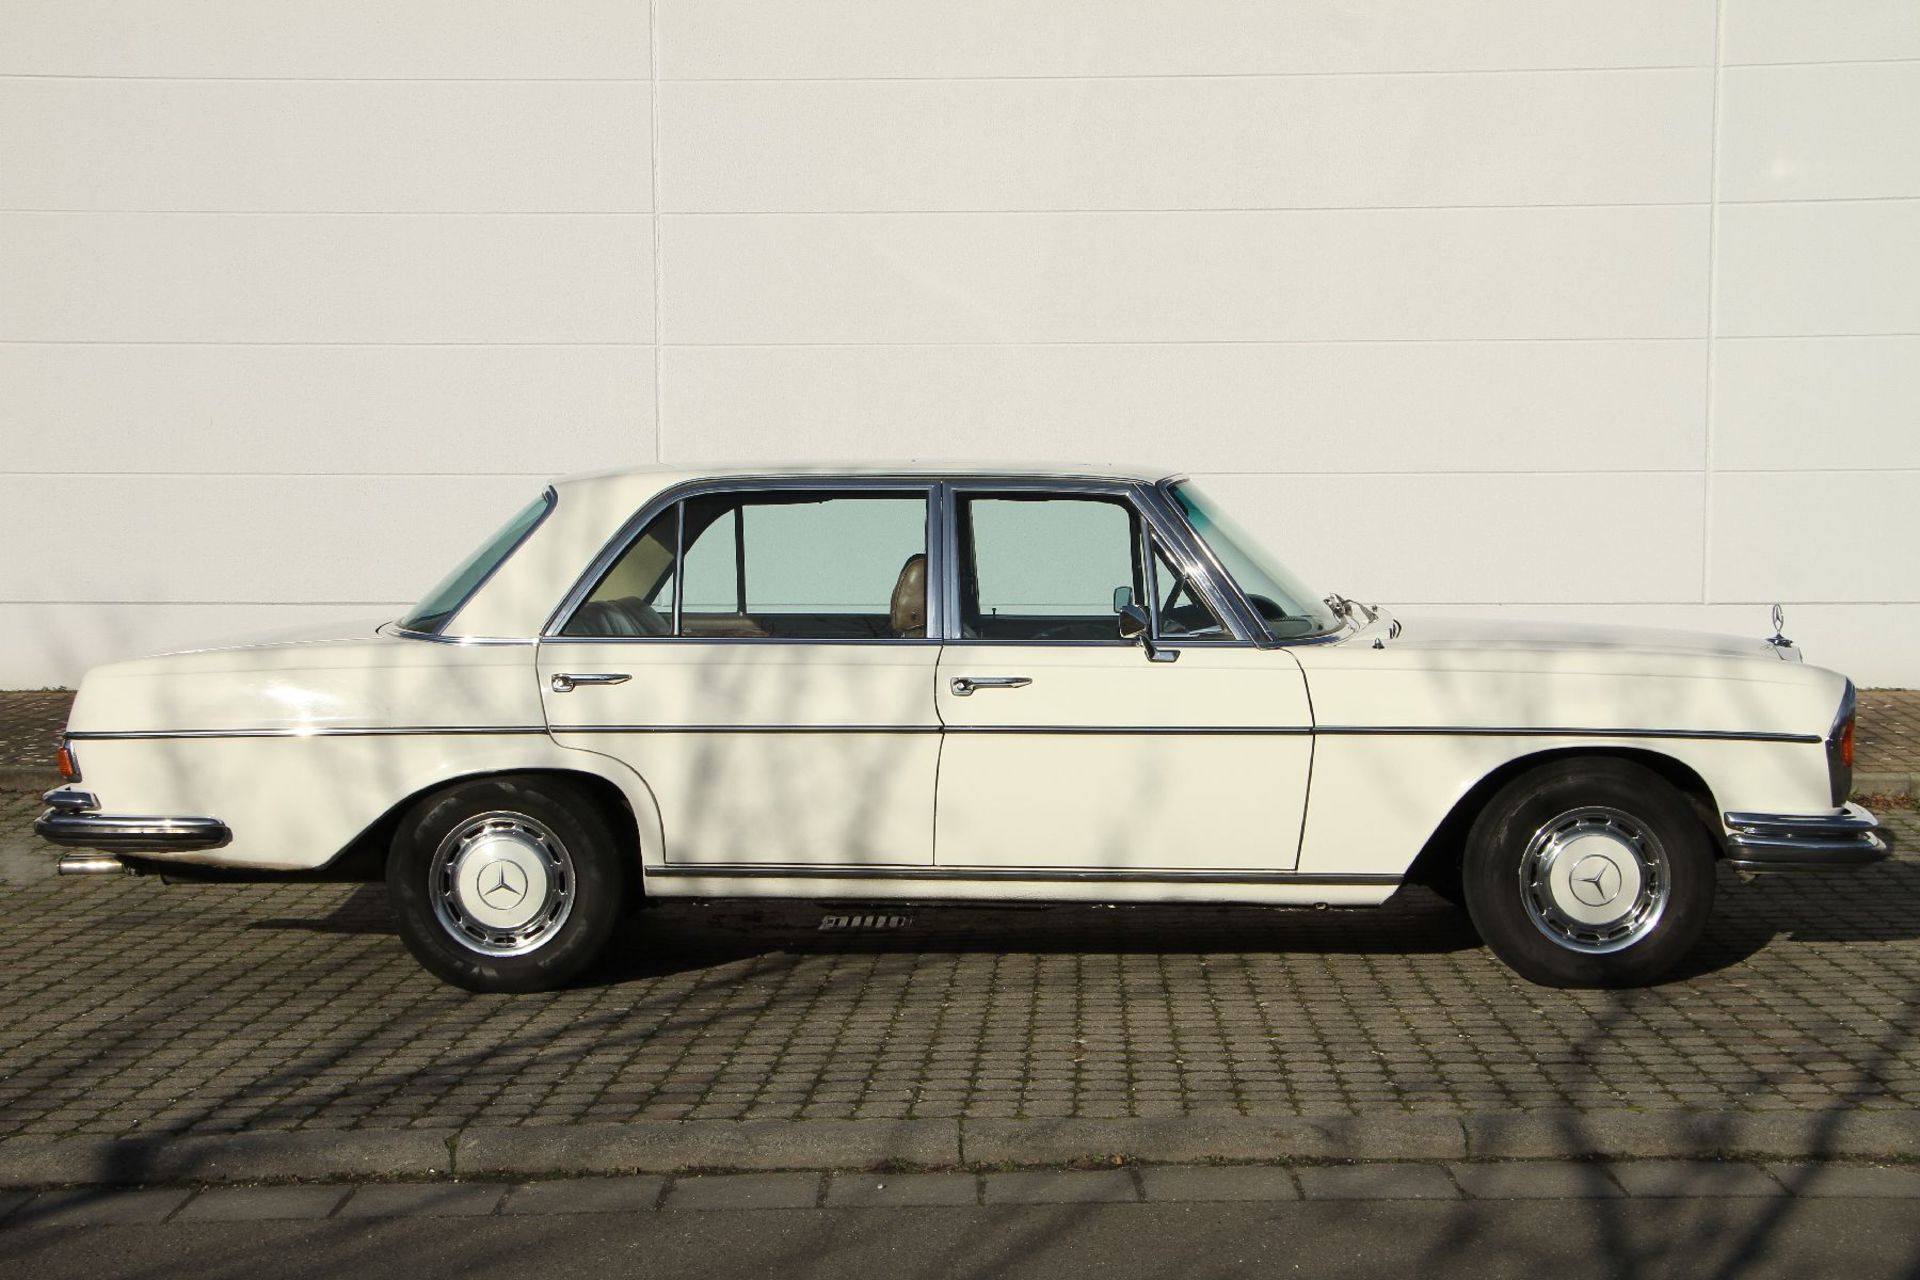 Mercedes-Benz 300 SEL 3,5, Chassis Number: 10905612007692, first registered 09/1971, german car with - Bild 3 aus 15